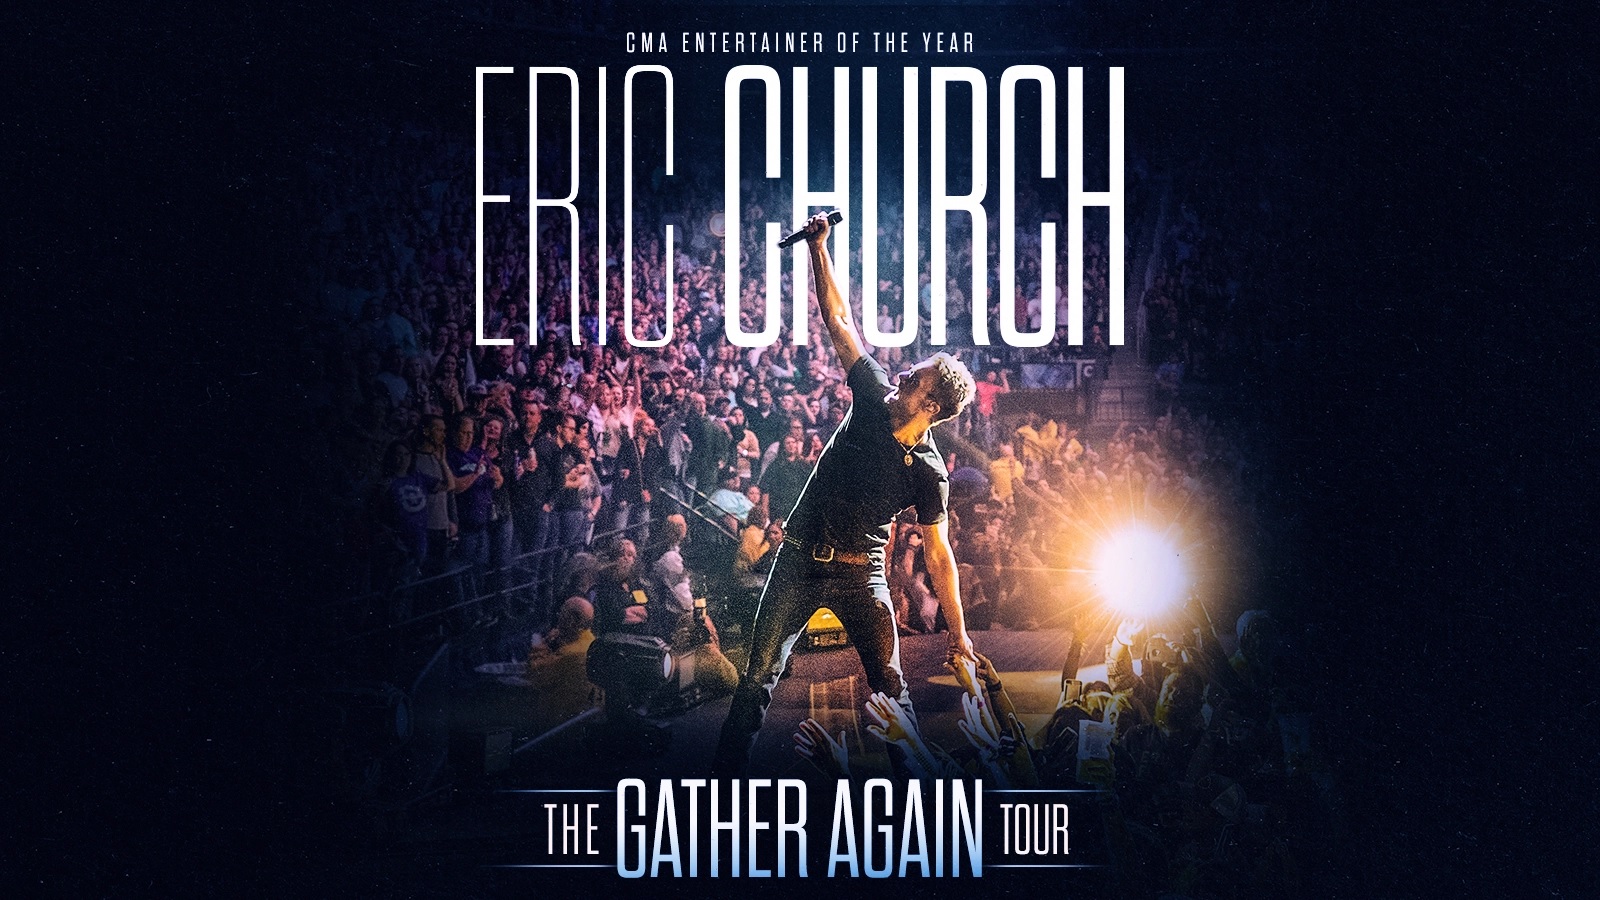 <h1 class="tribe-events-single-event-title">Eric Church</h1>